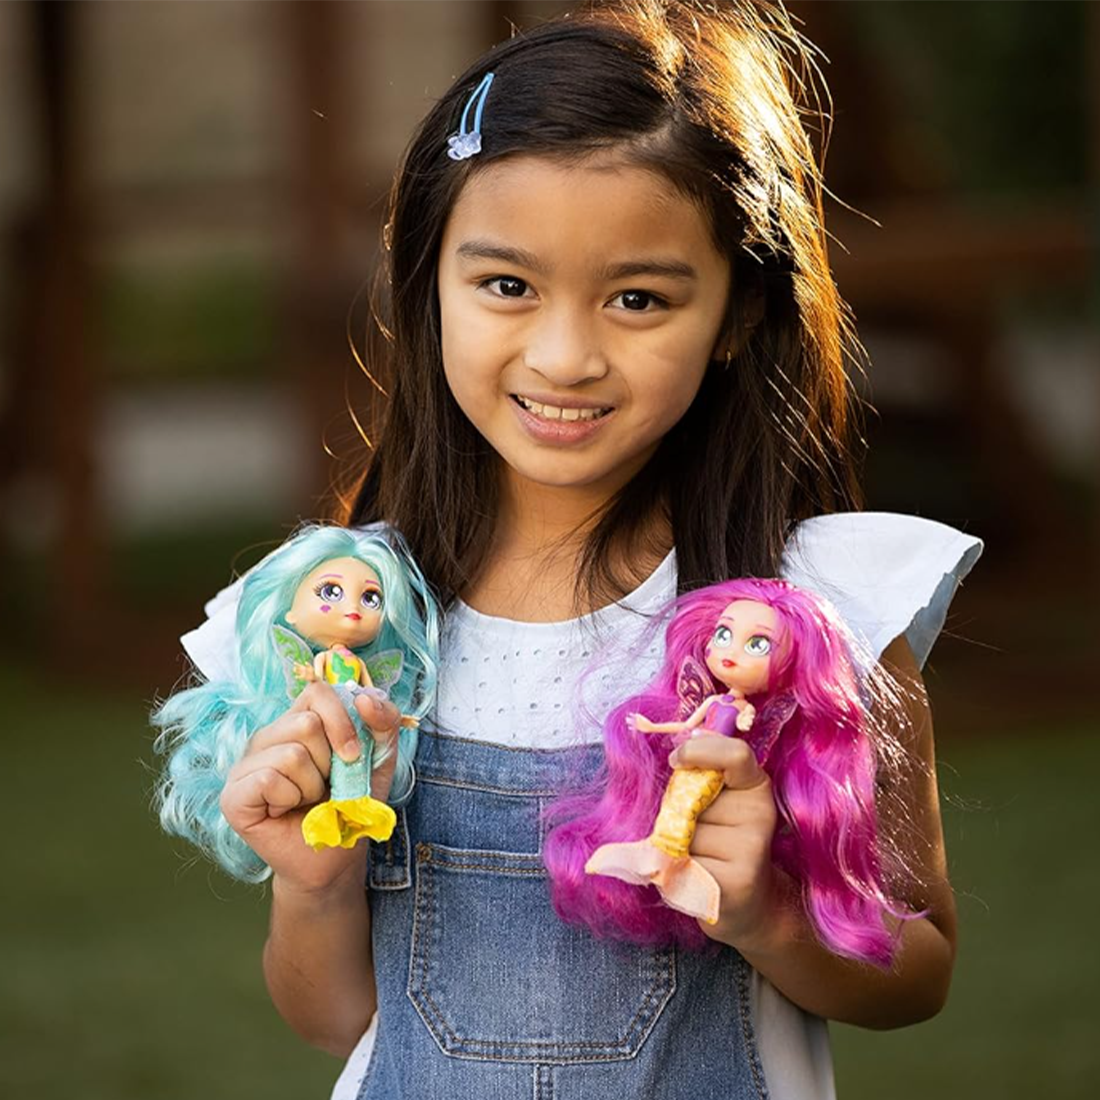 Bright Fairy Friends BFF Mermaid Doll with Colour Change Wings